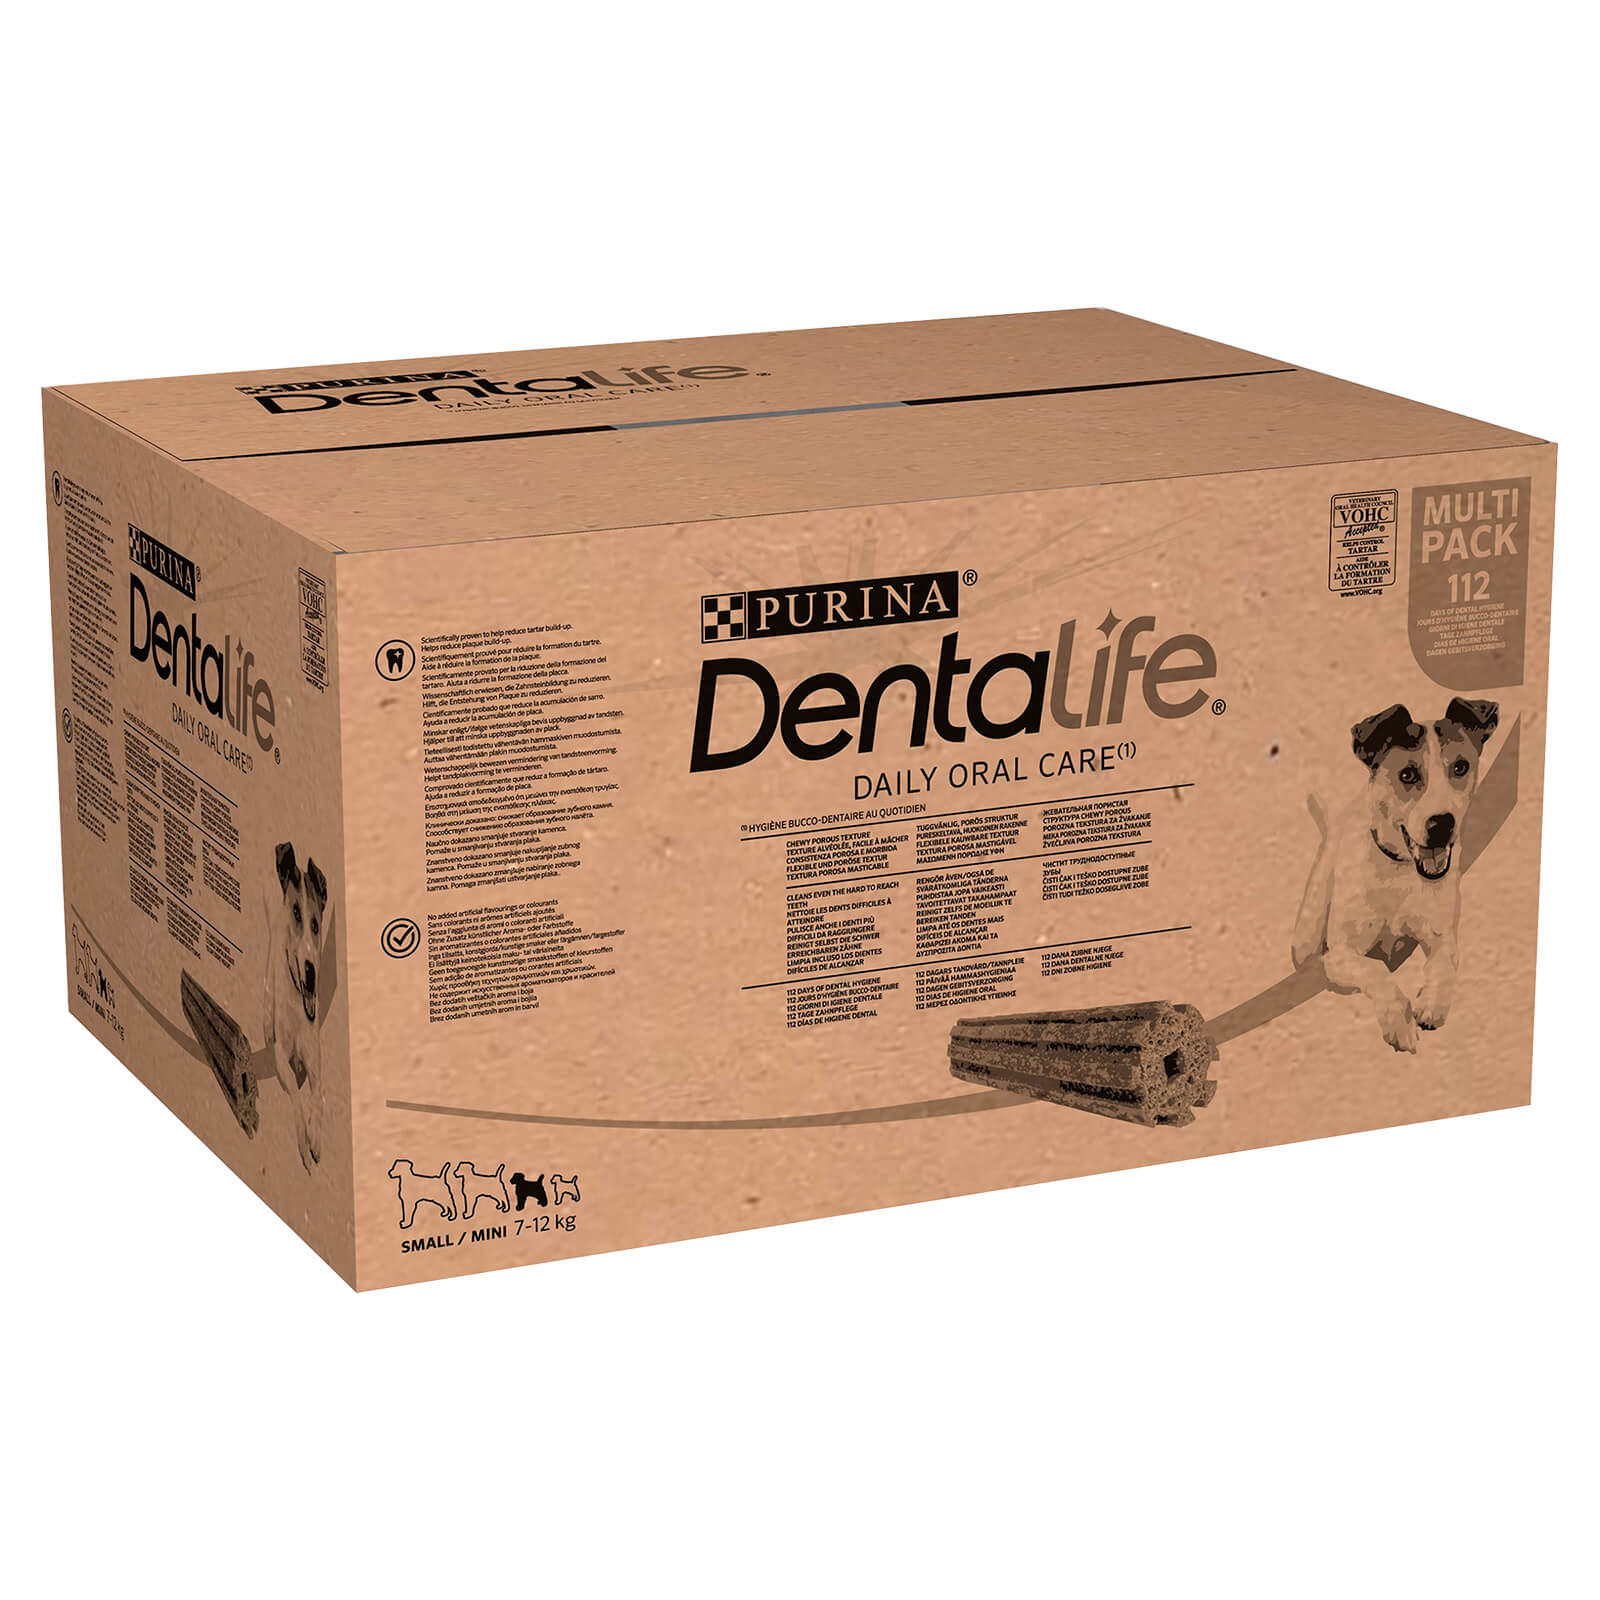 Image of Repeat Delivery - Dentalife Small Dog Chew - 112 Stick Bulk Pack - 4 Months